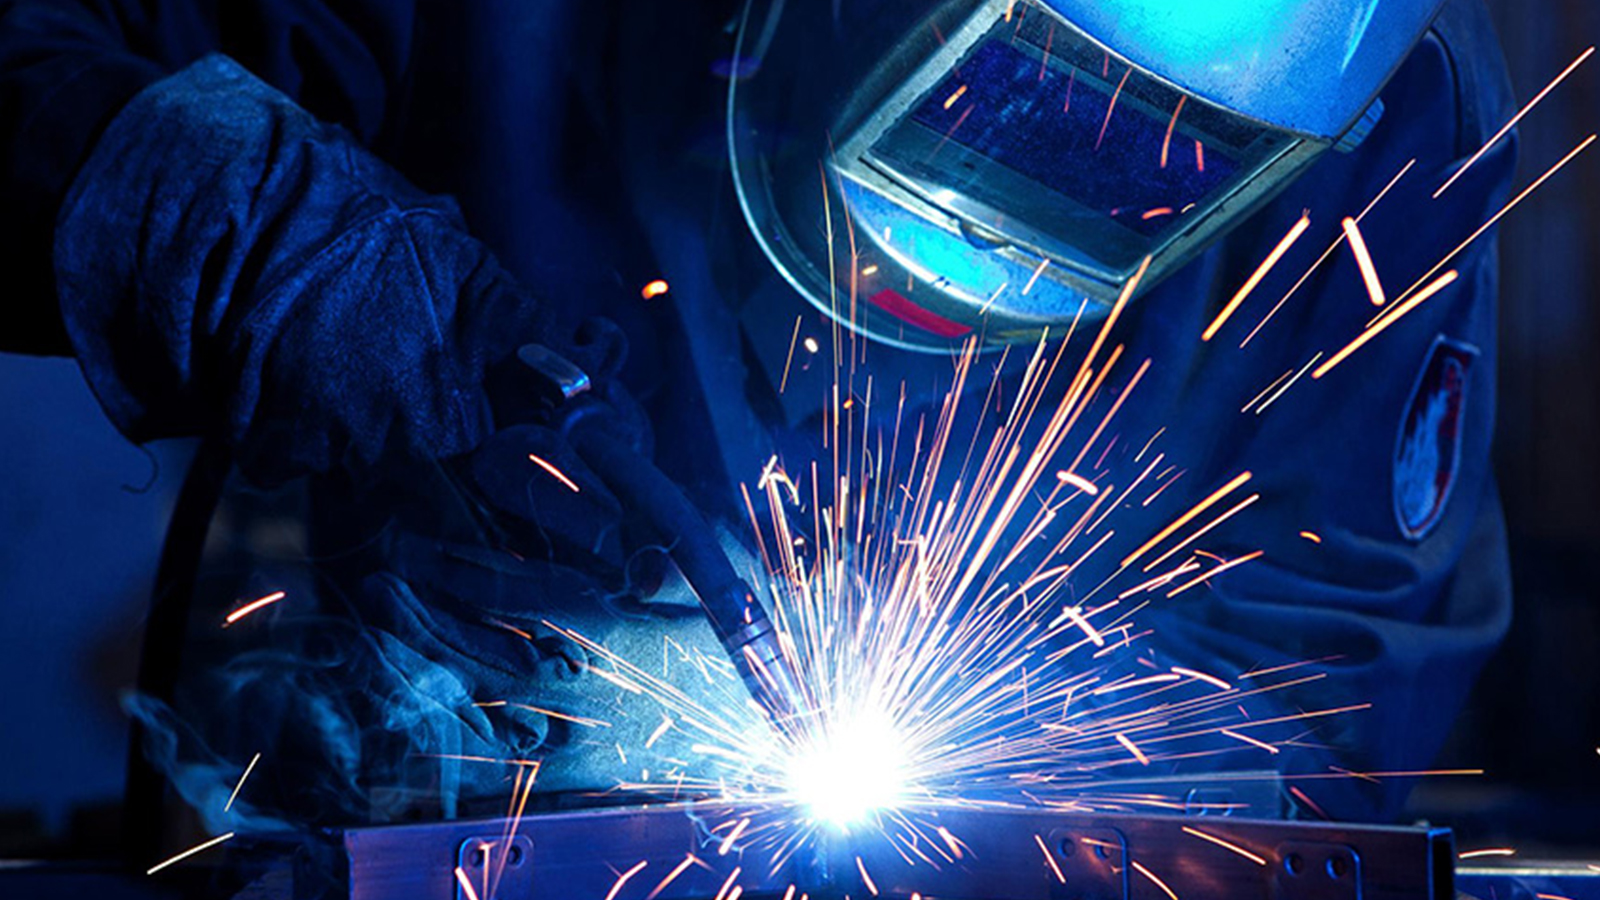 Image: Welding and Fabrication - Crafting Excellence with High Standards